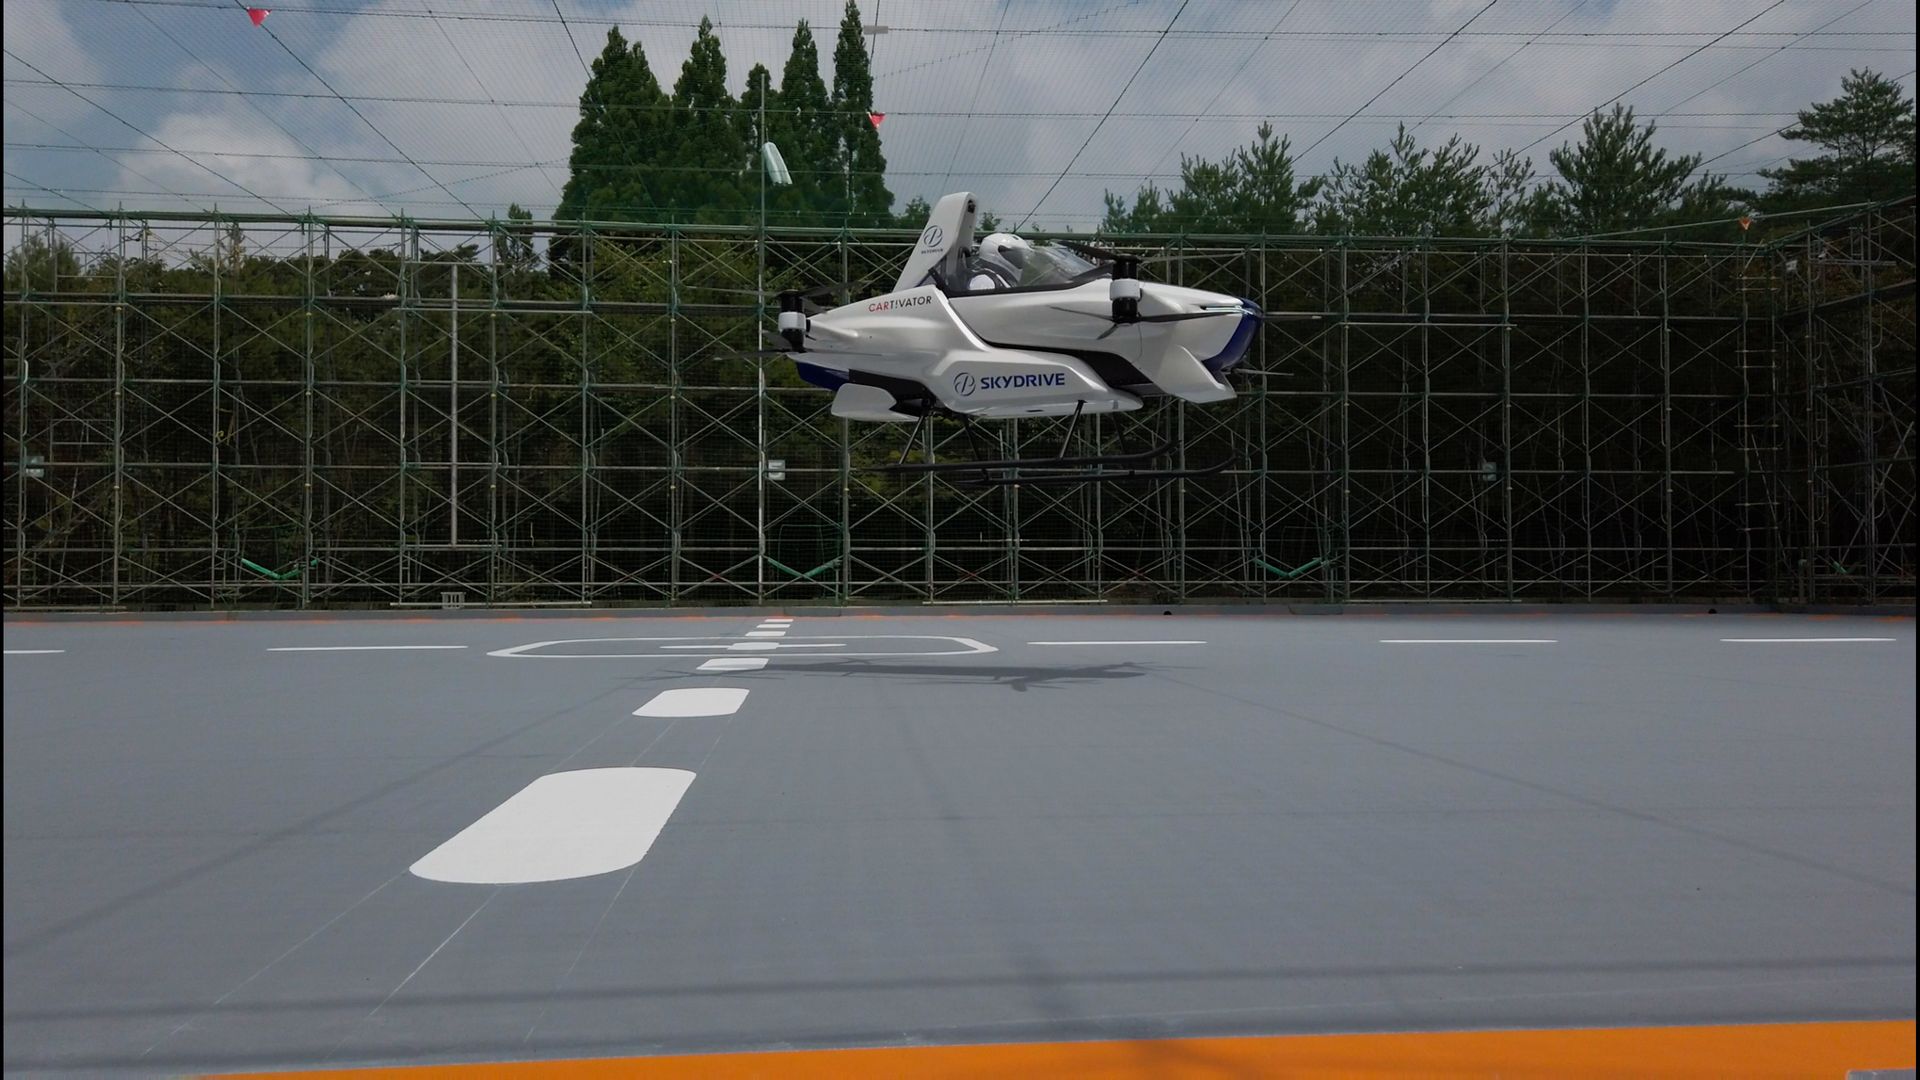 Photo of SkyDrive's SD-03 model, an electrical vertical takeoff and landing vehicle.